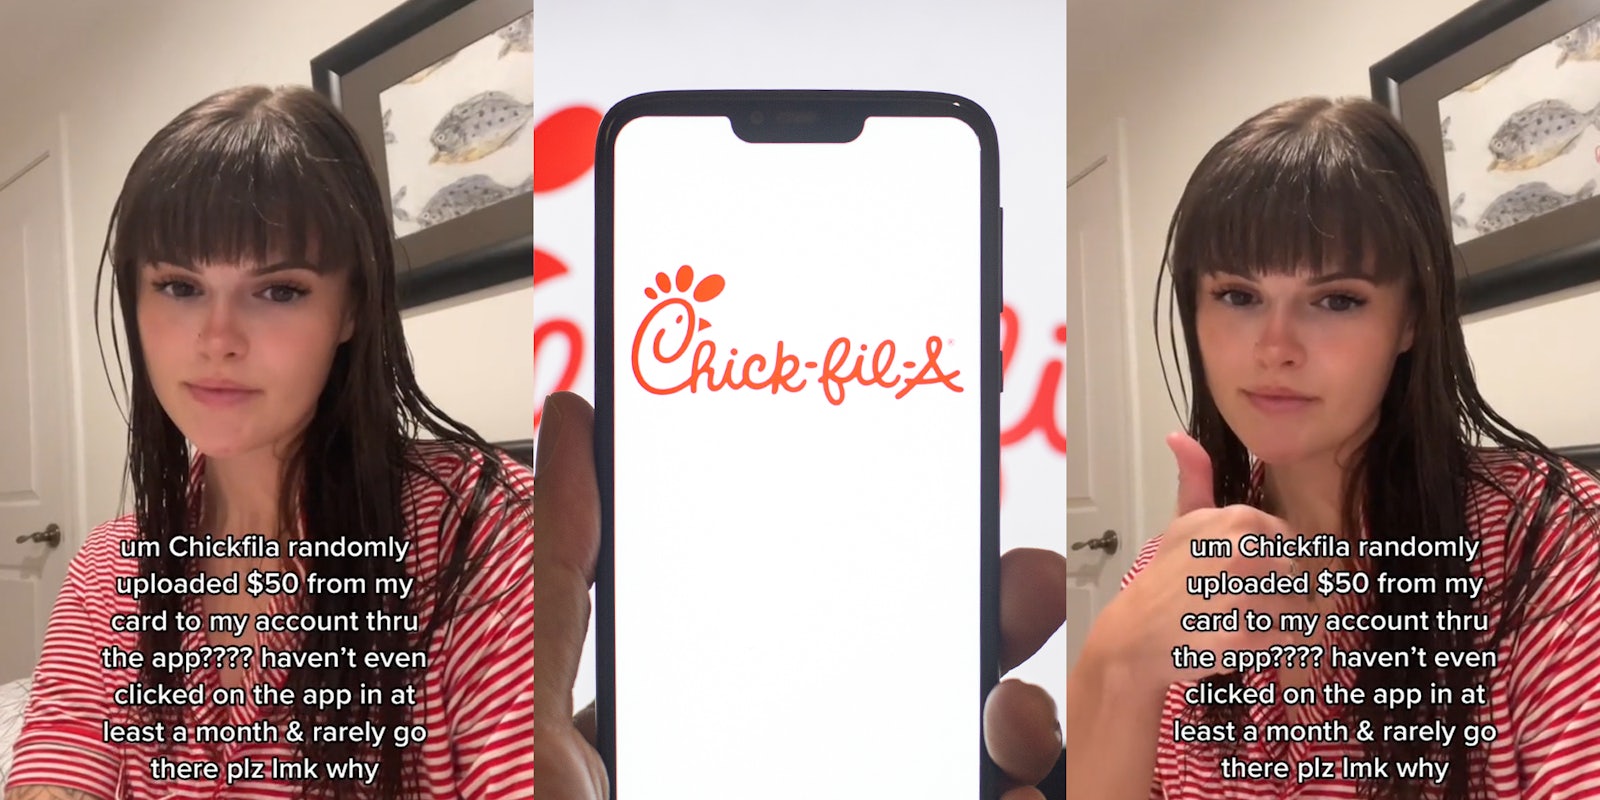 woman with caption 'um Chickfila randomly uploaded $50 from my card to my account thru the app??? haven't even clicked on the app in at least a month & rarely go there plz lmk why' (l) Chick-Fil-A on phone in hand in front of white and red background (c) woman with thumb up with caption 'um Chickfila randomly uploaded $50 from my card to my account thru the app??? haven't even clicked on the app in at least a month & rarely go there plz lmk why' (r)